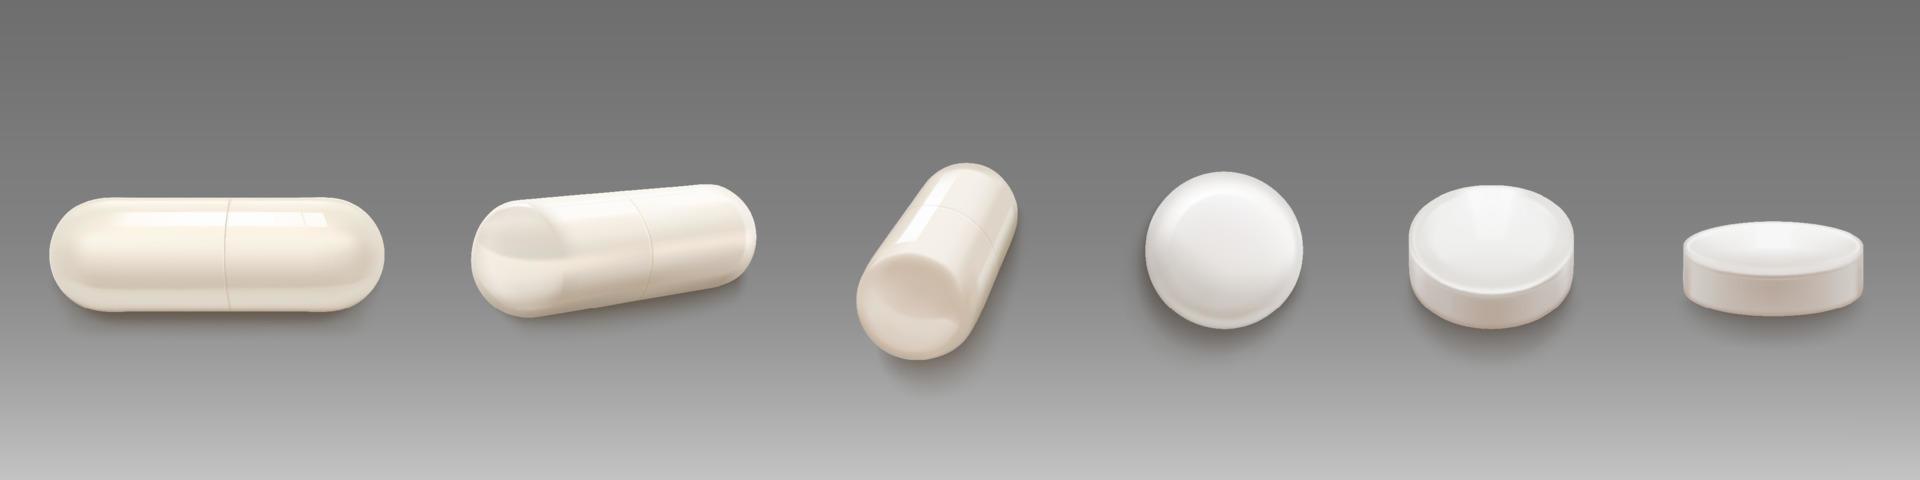 White medical pills and capsules vector